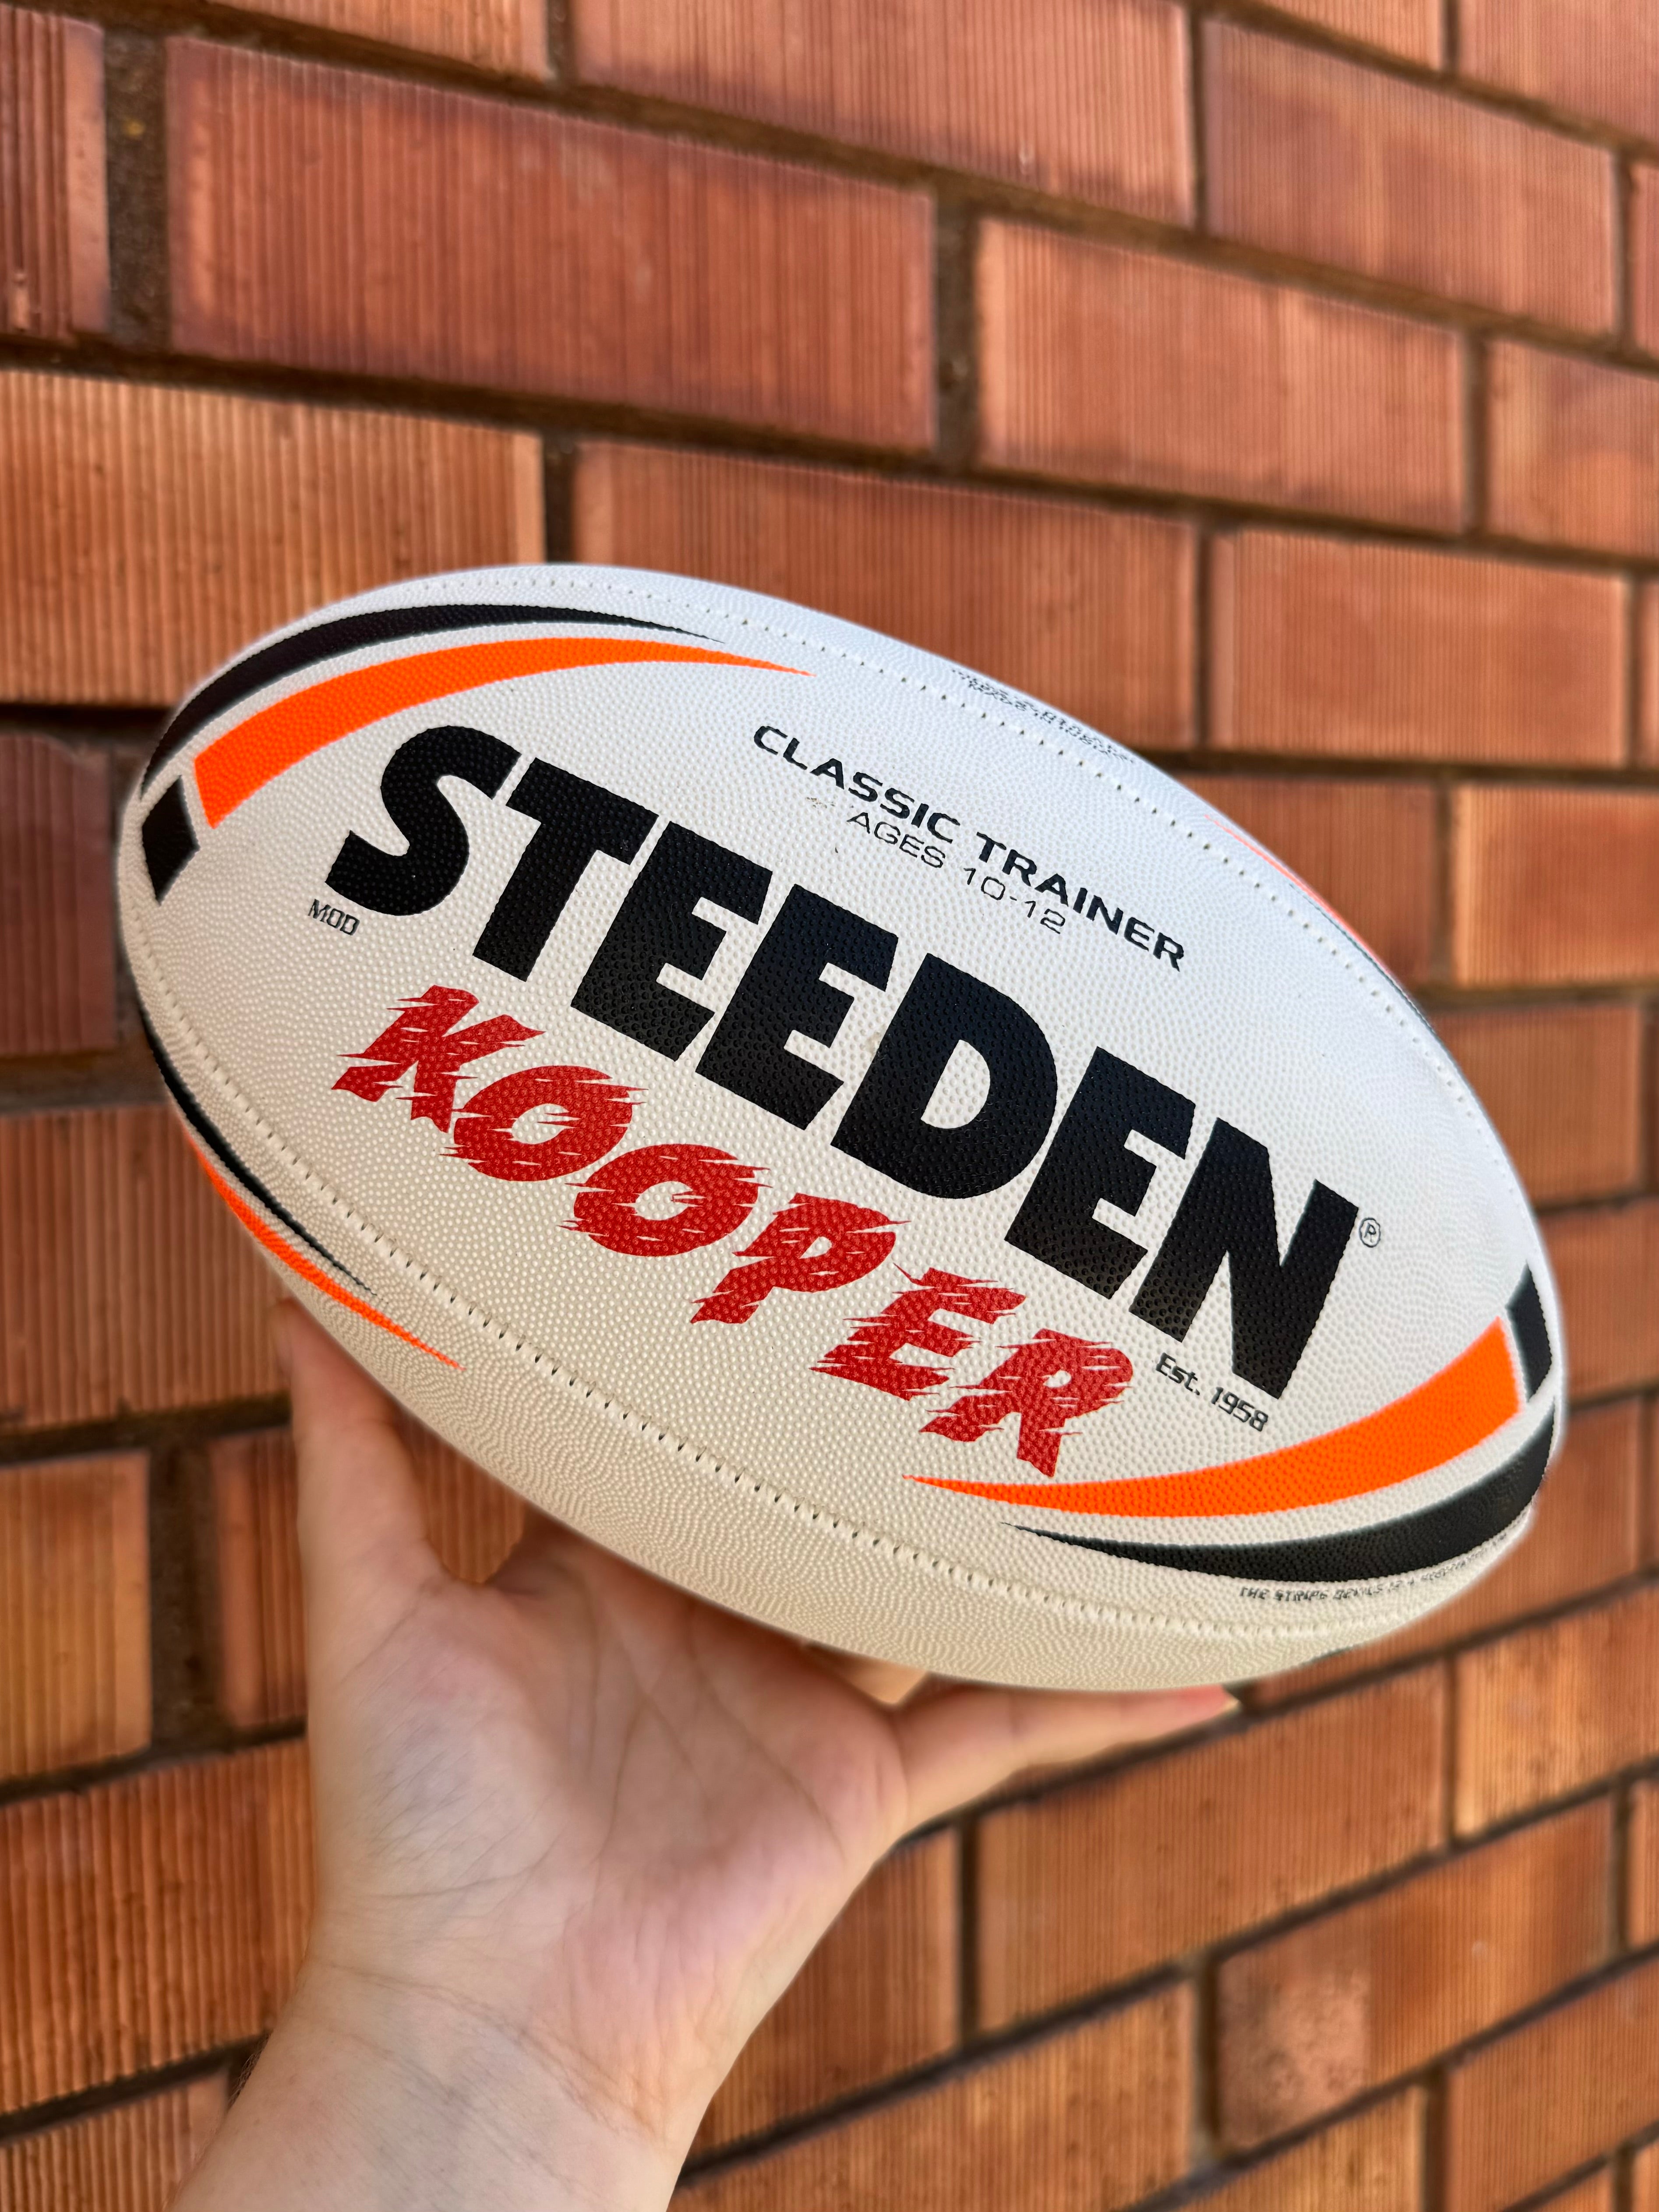 Personalised White/Orange Steeden Rugby League Balls (Mod Size)